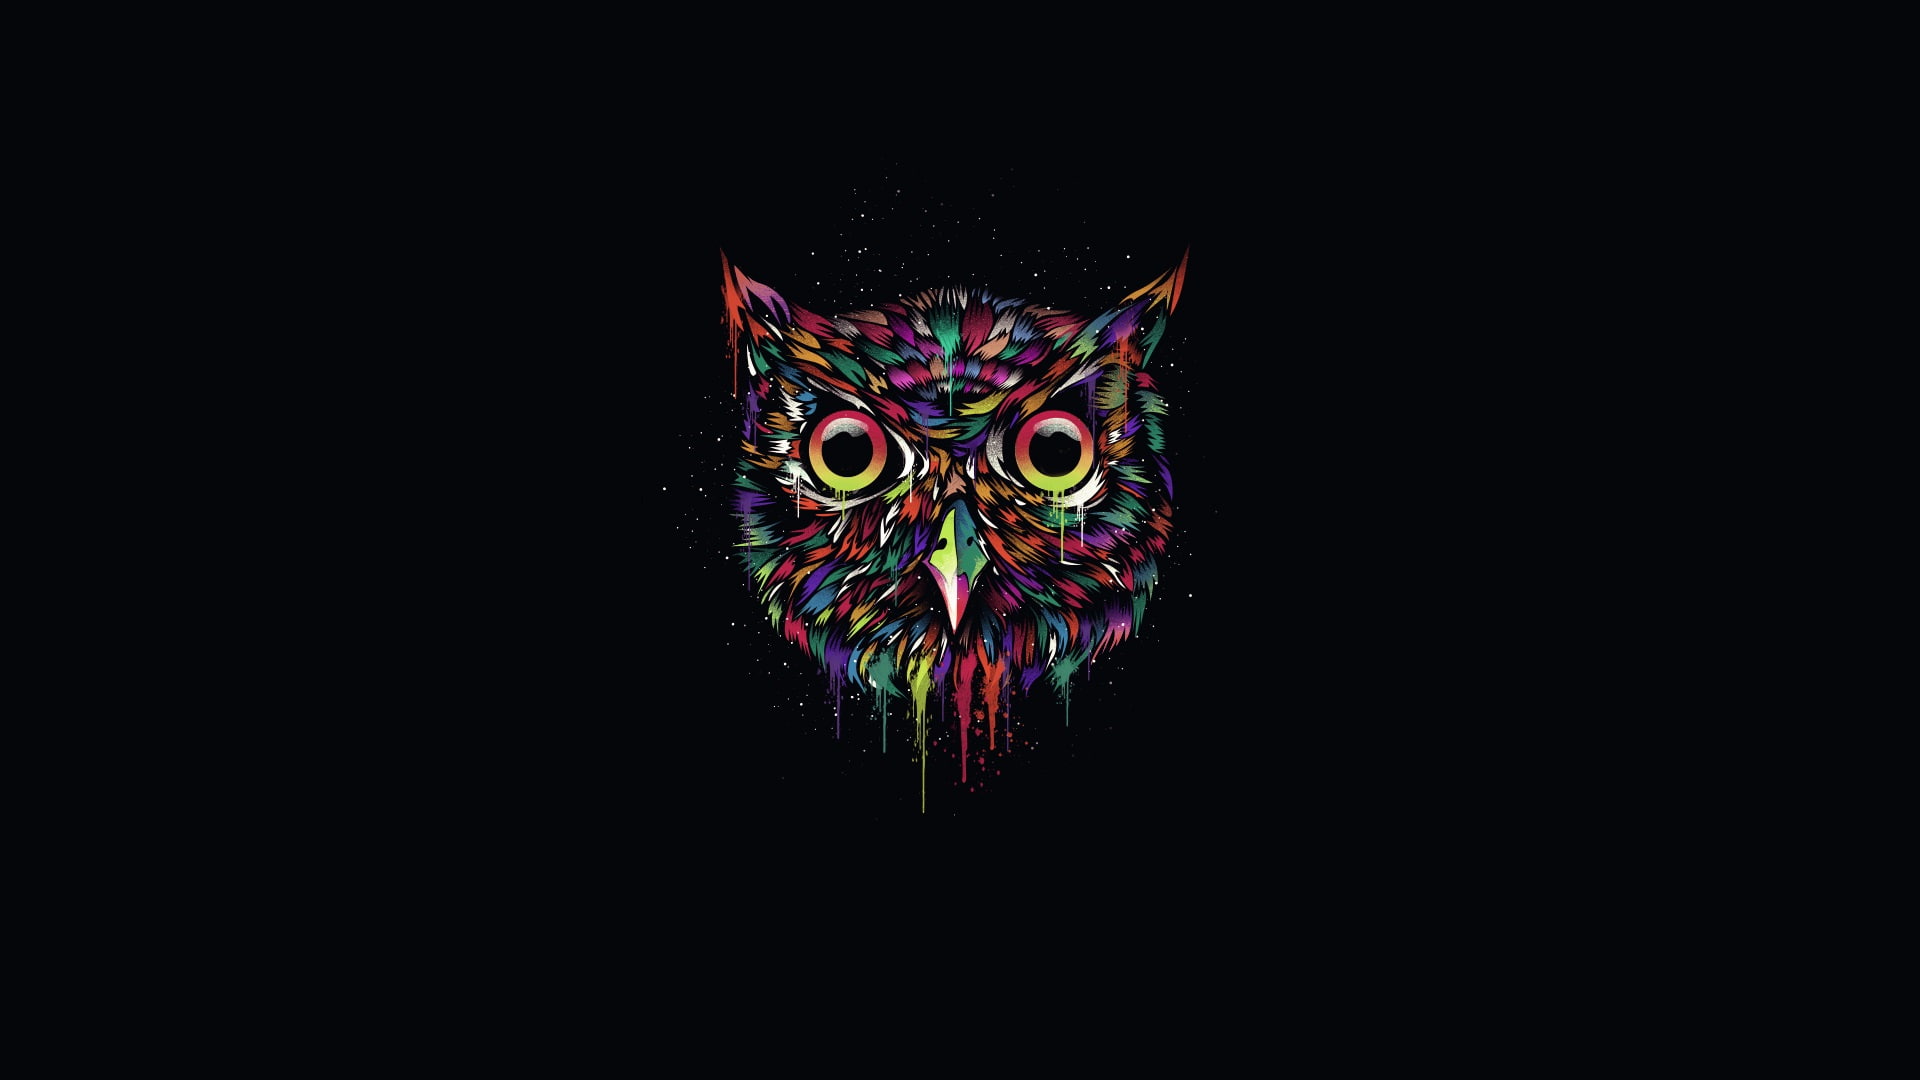 Colorful owl, creative design, black background, red green and purple owl illustration